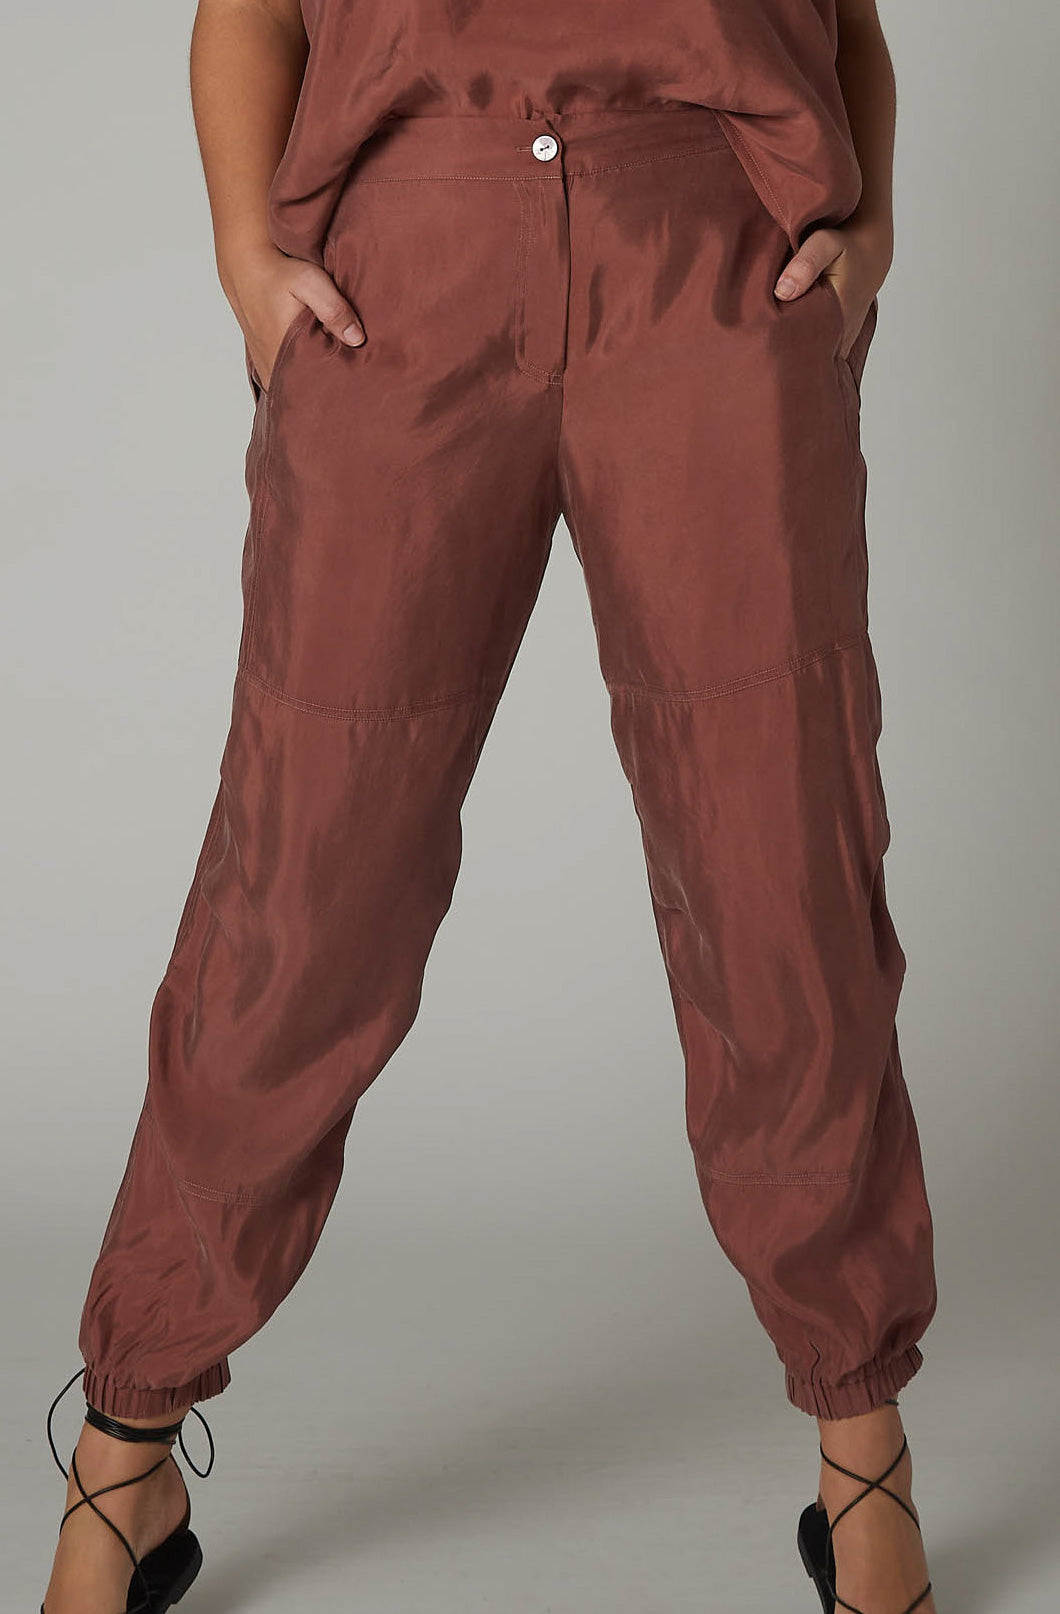 The Effortless Draped Pants